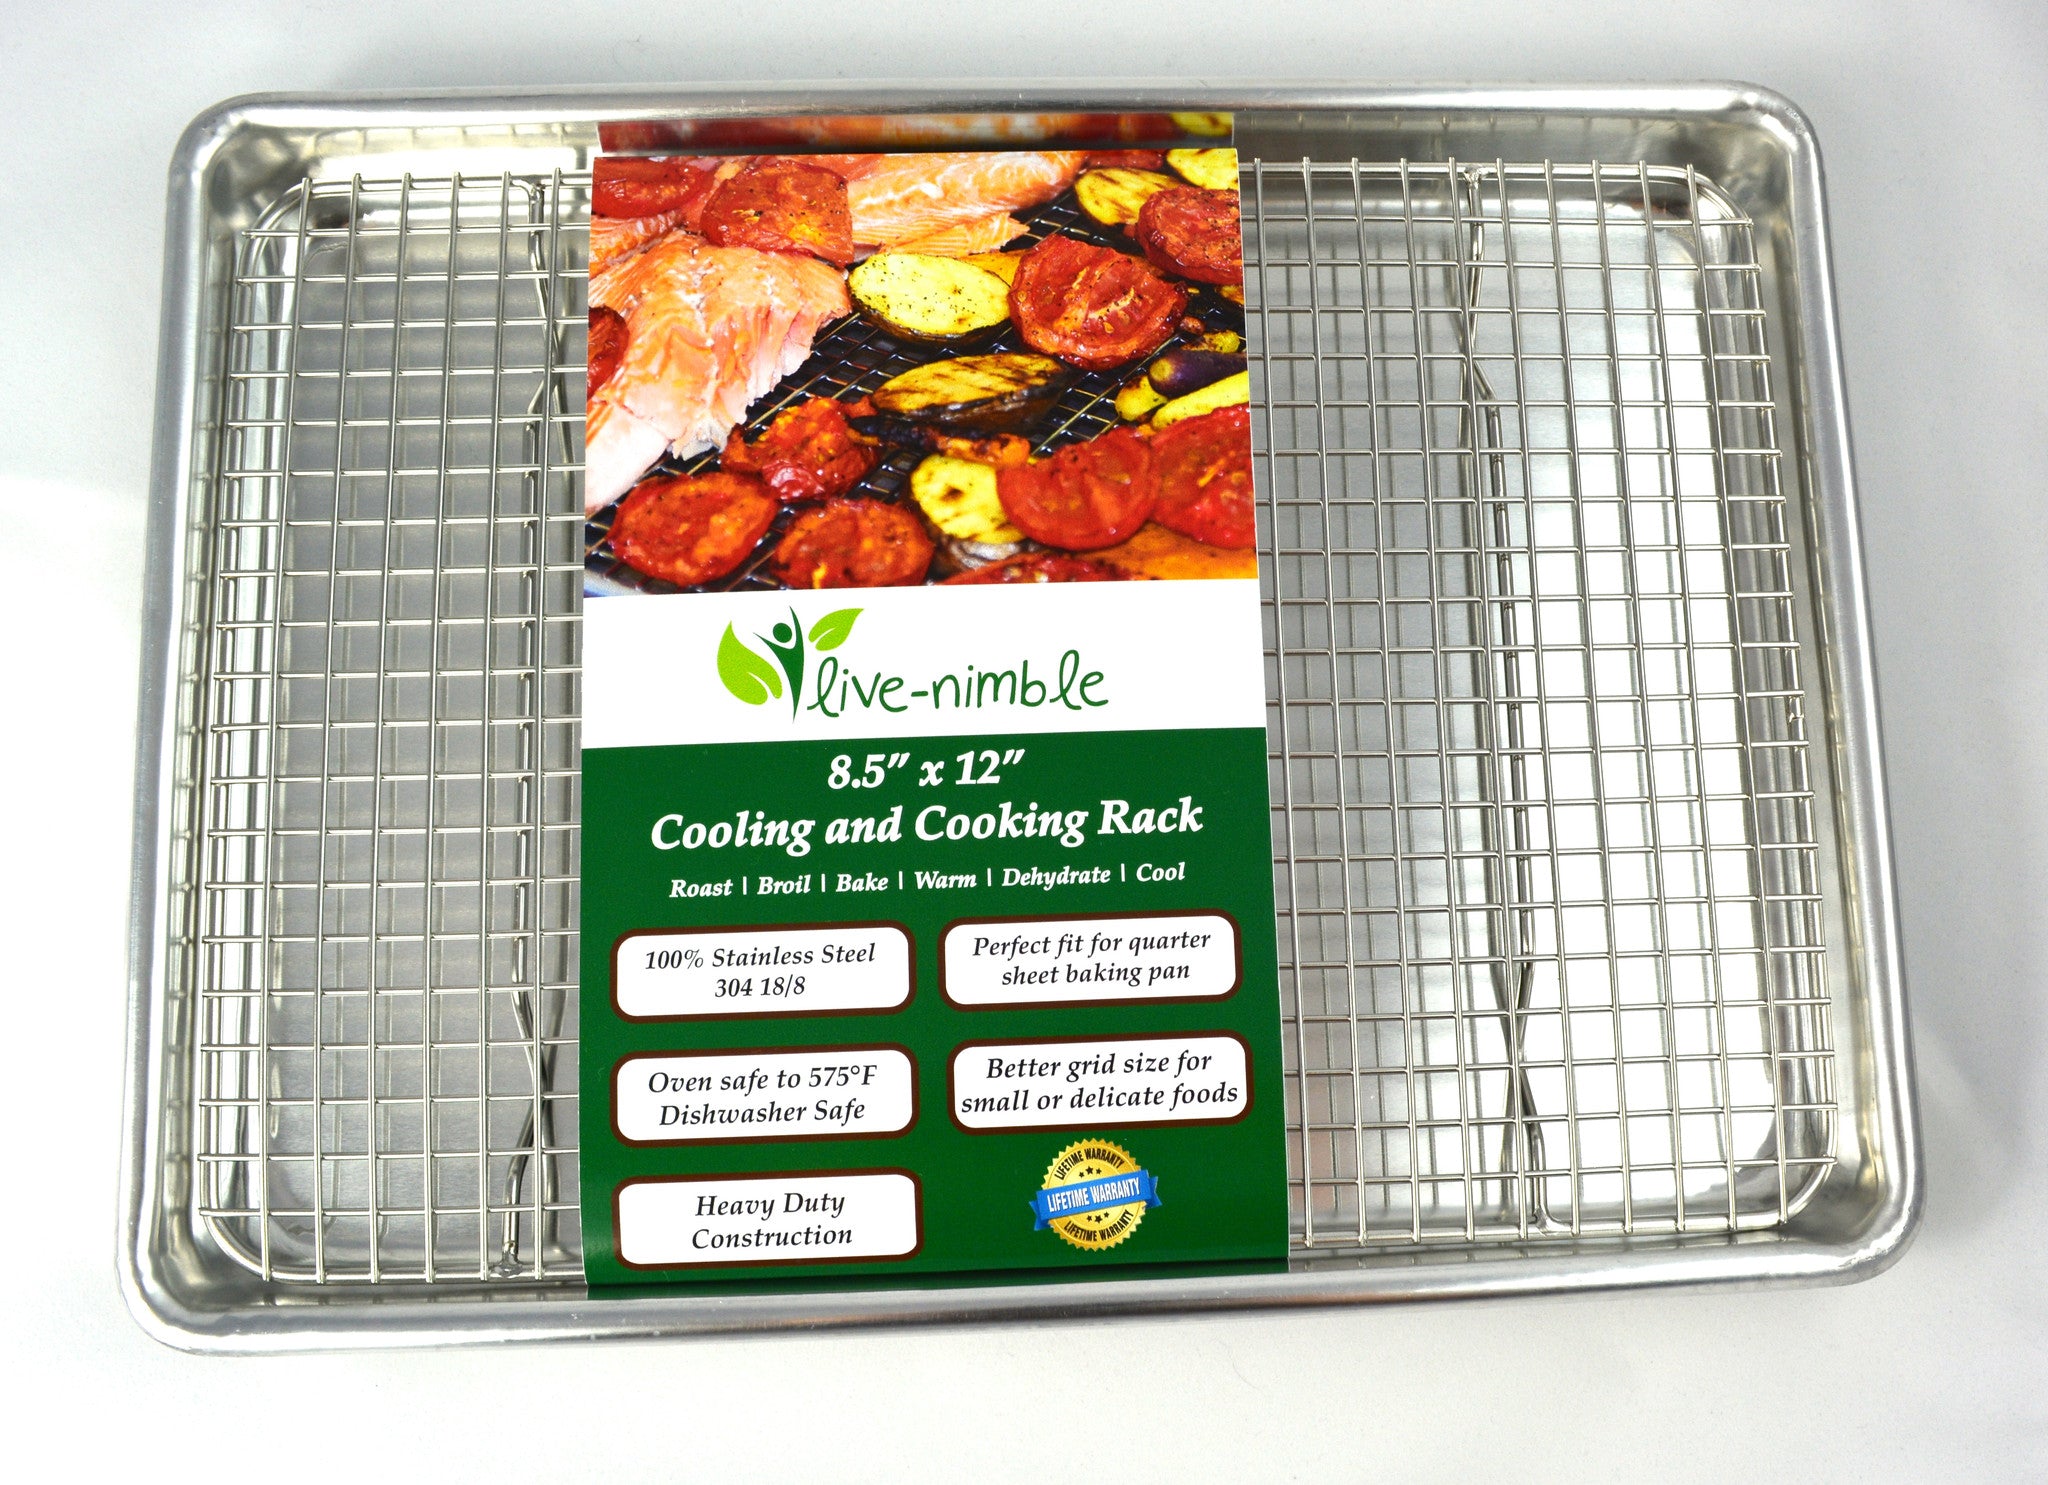 Stainless Steel Baking & Cooling Wire Rack - 12 x 17 Fits Half Sheet Pan